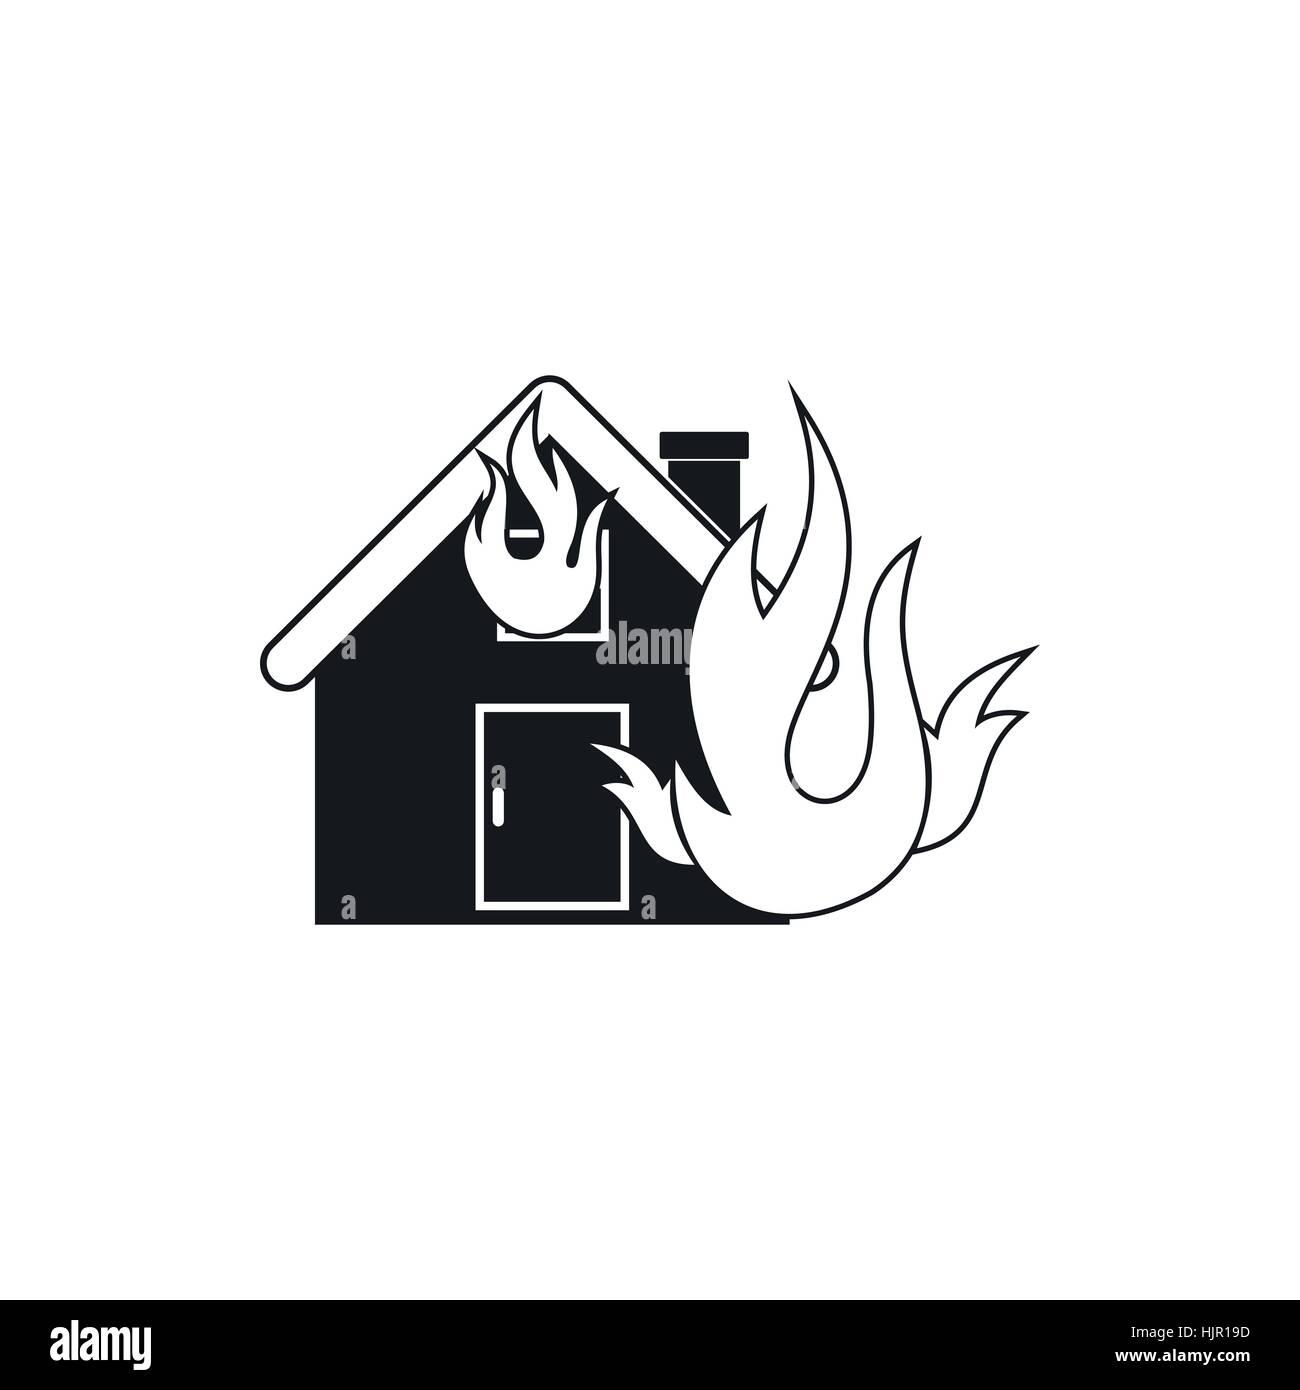 House on fire icon in simple style on a white background Stock Vector